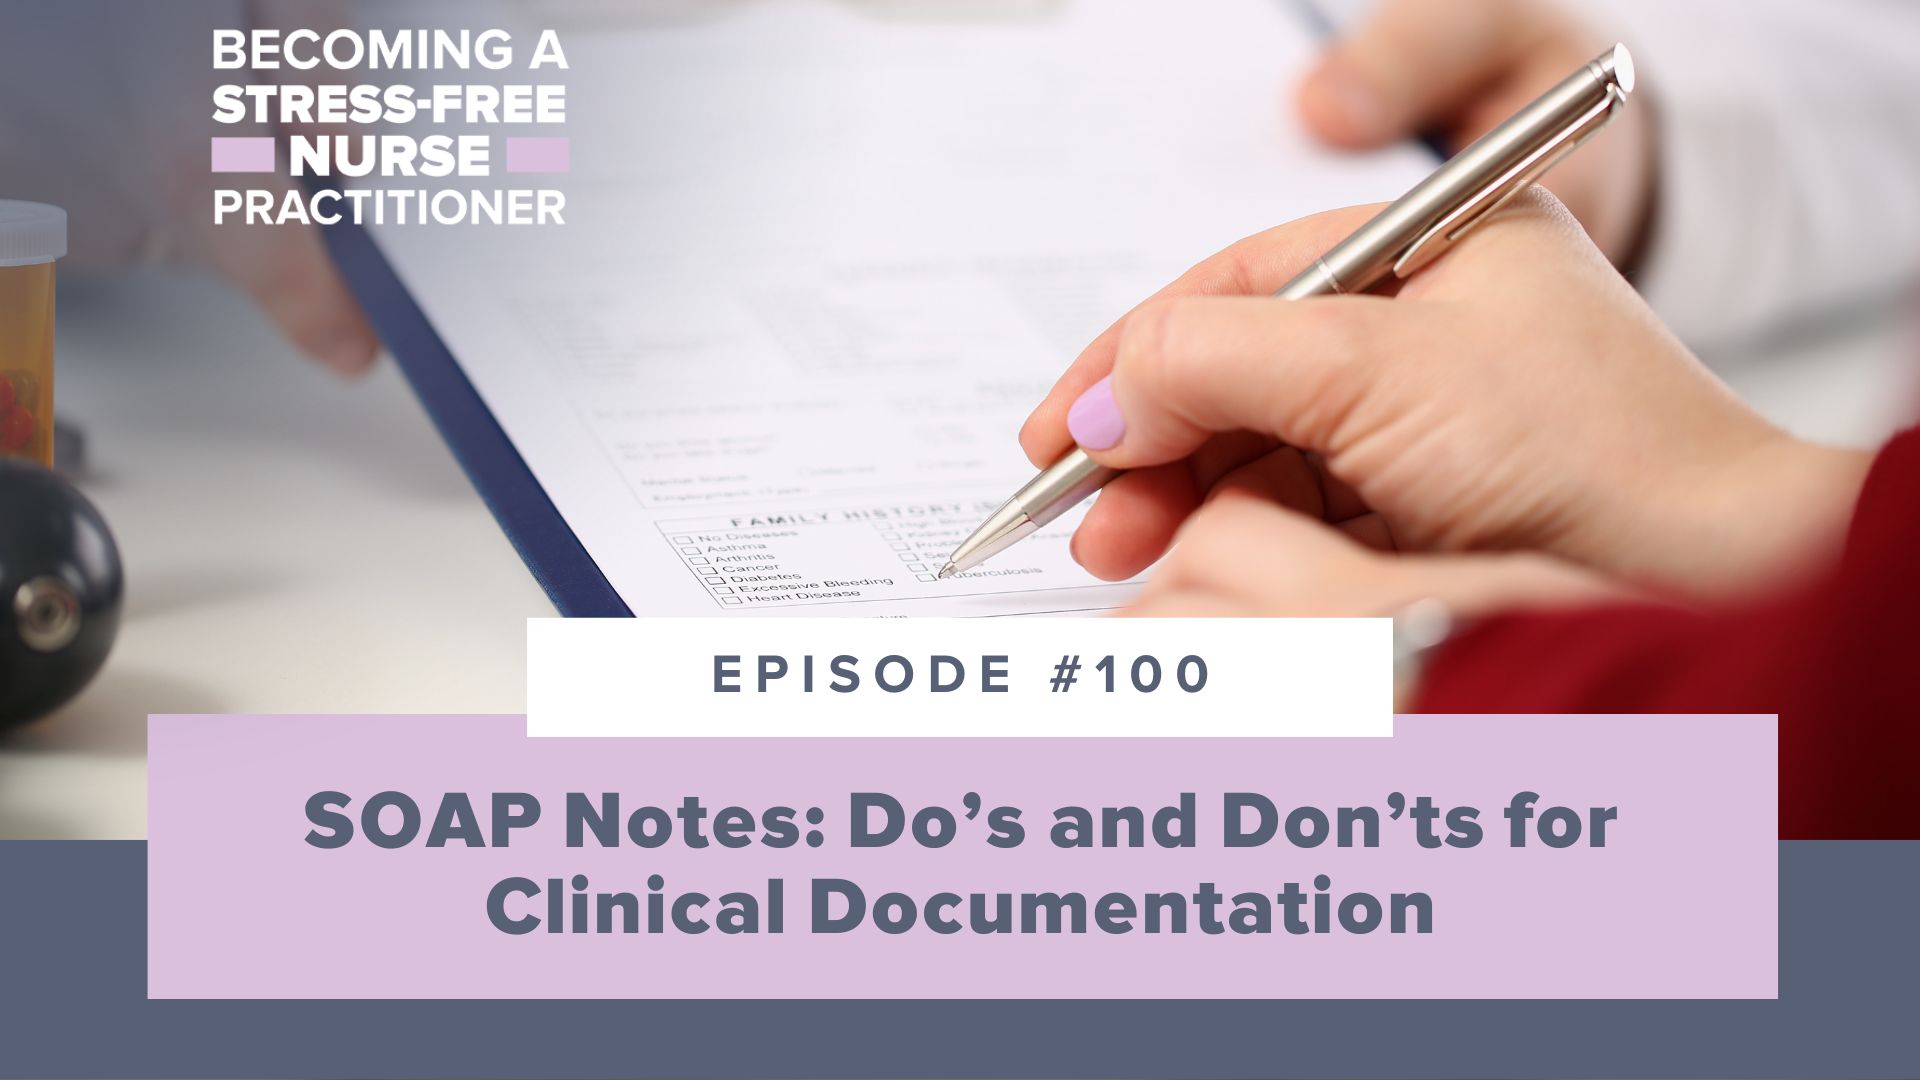 SMNP Blog - Ep #100: SOAP Notes: Do’s and Don’ts for Clinical Documentation